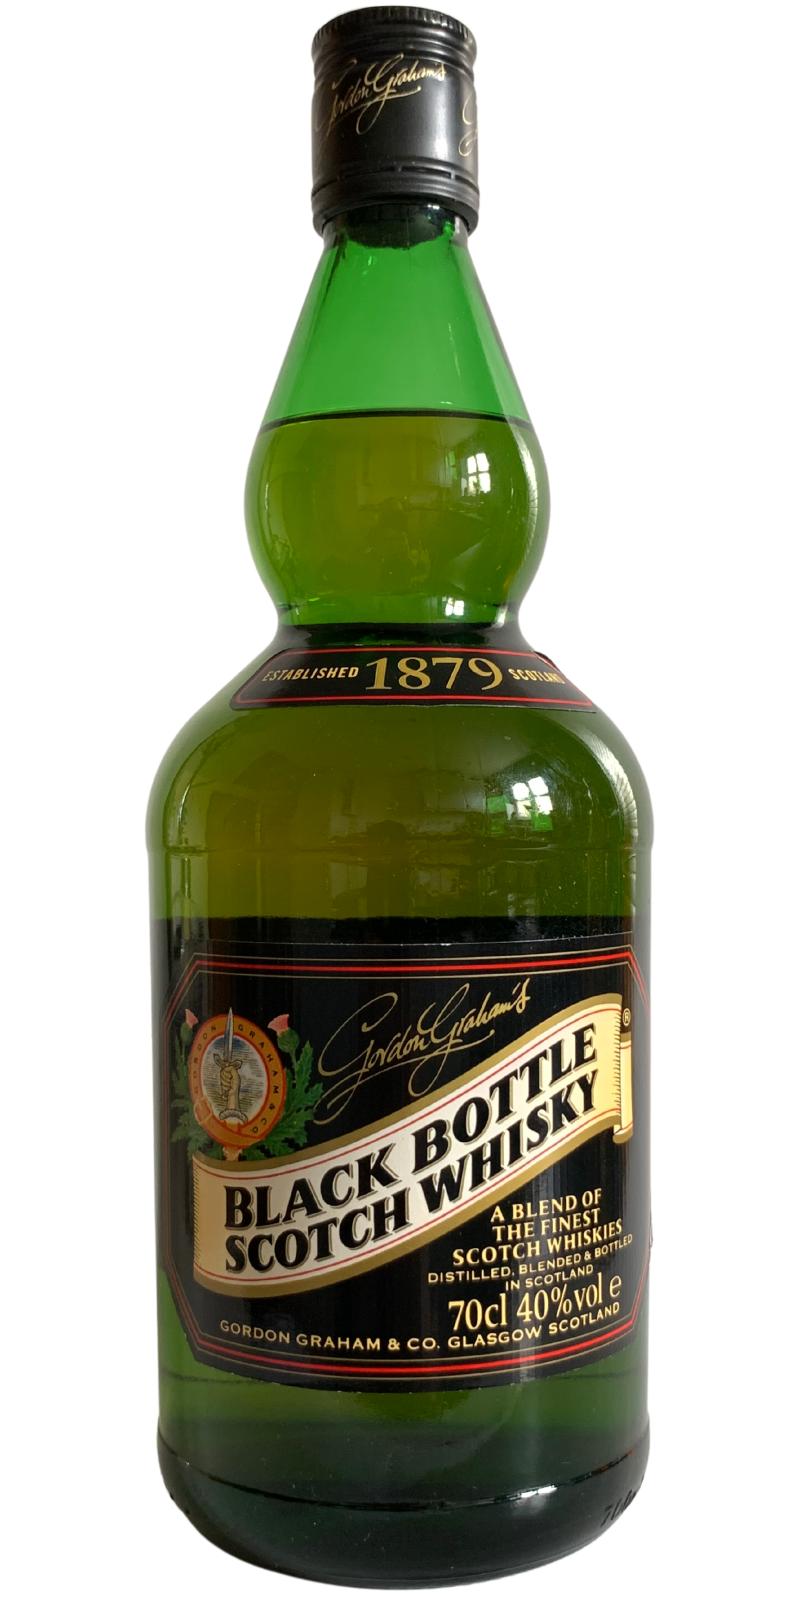 Black Bottle A Blend of the Finest Scotch Whiskies